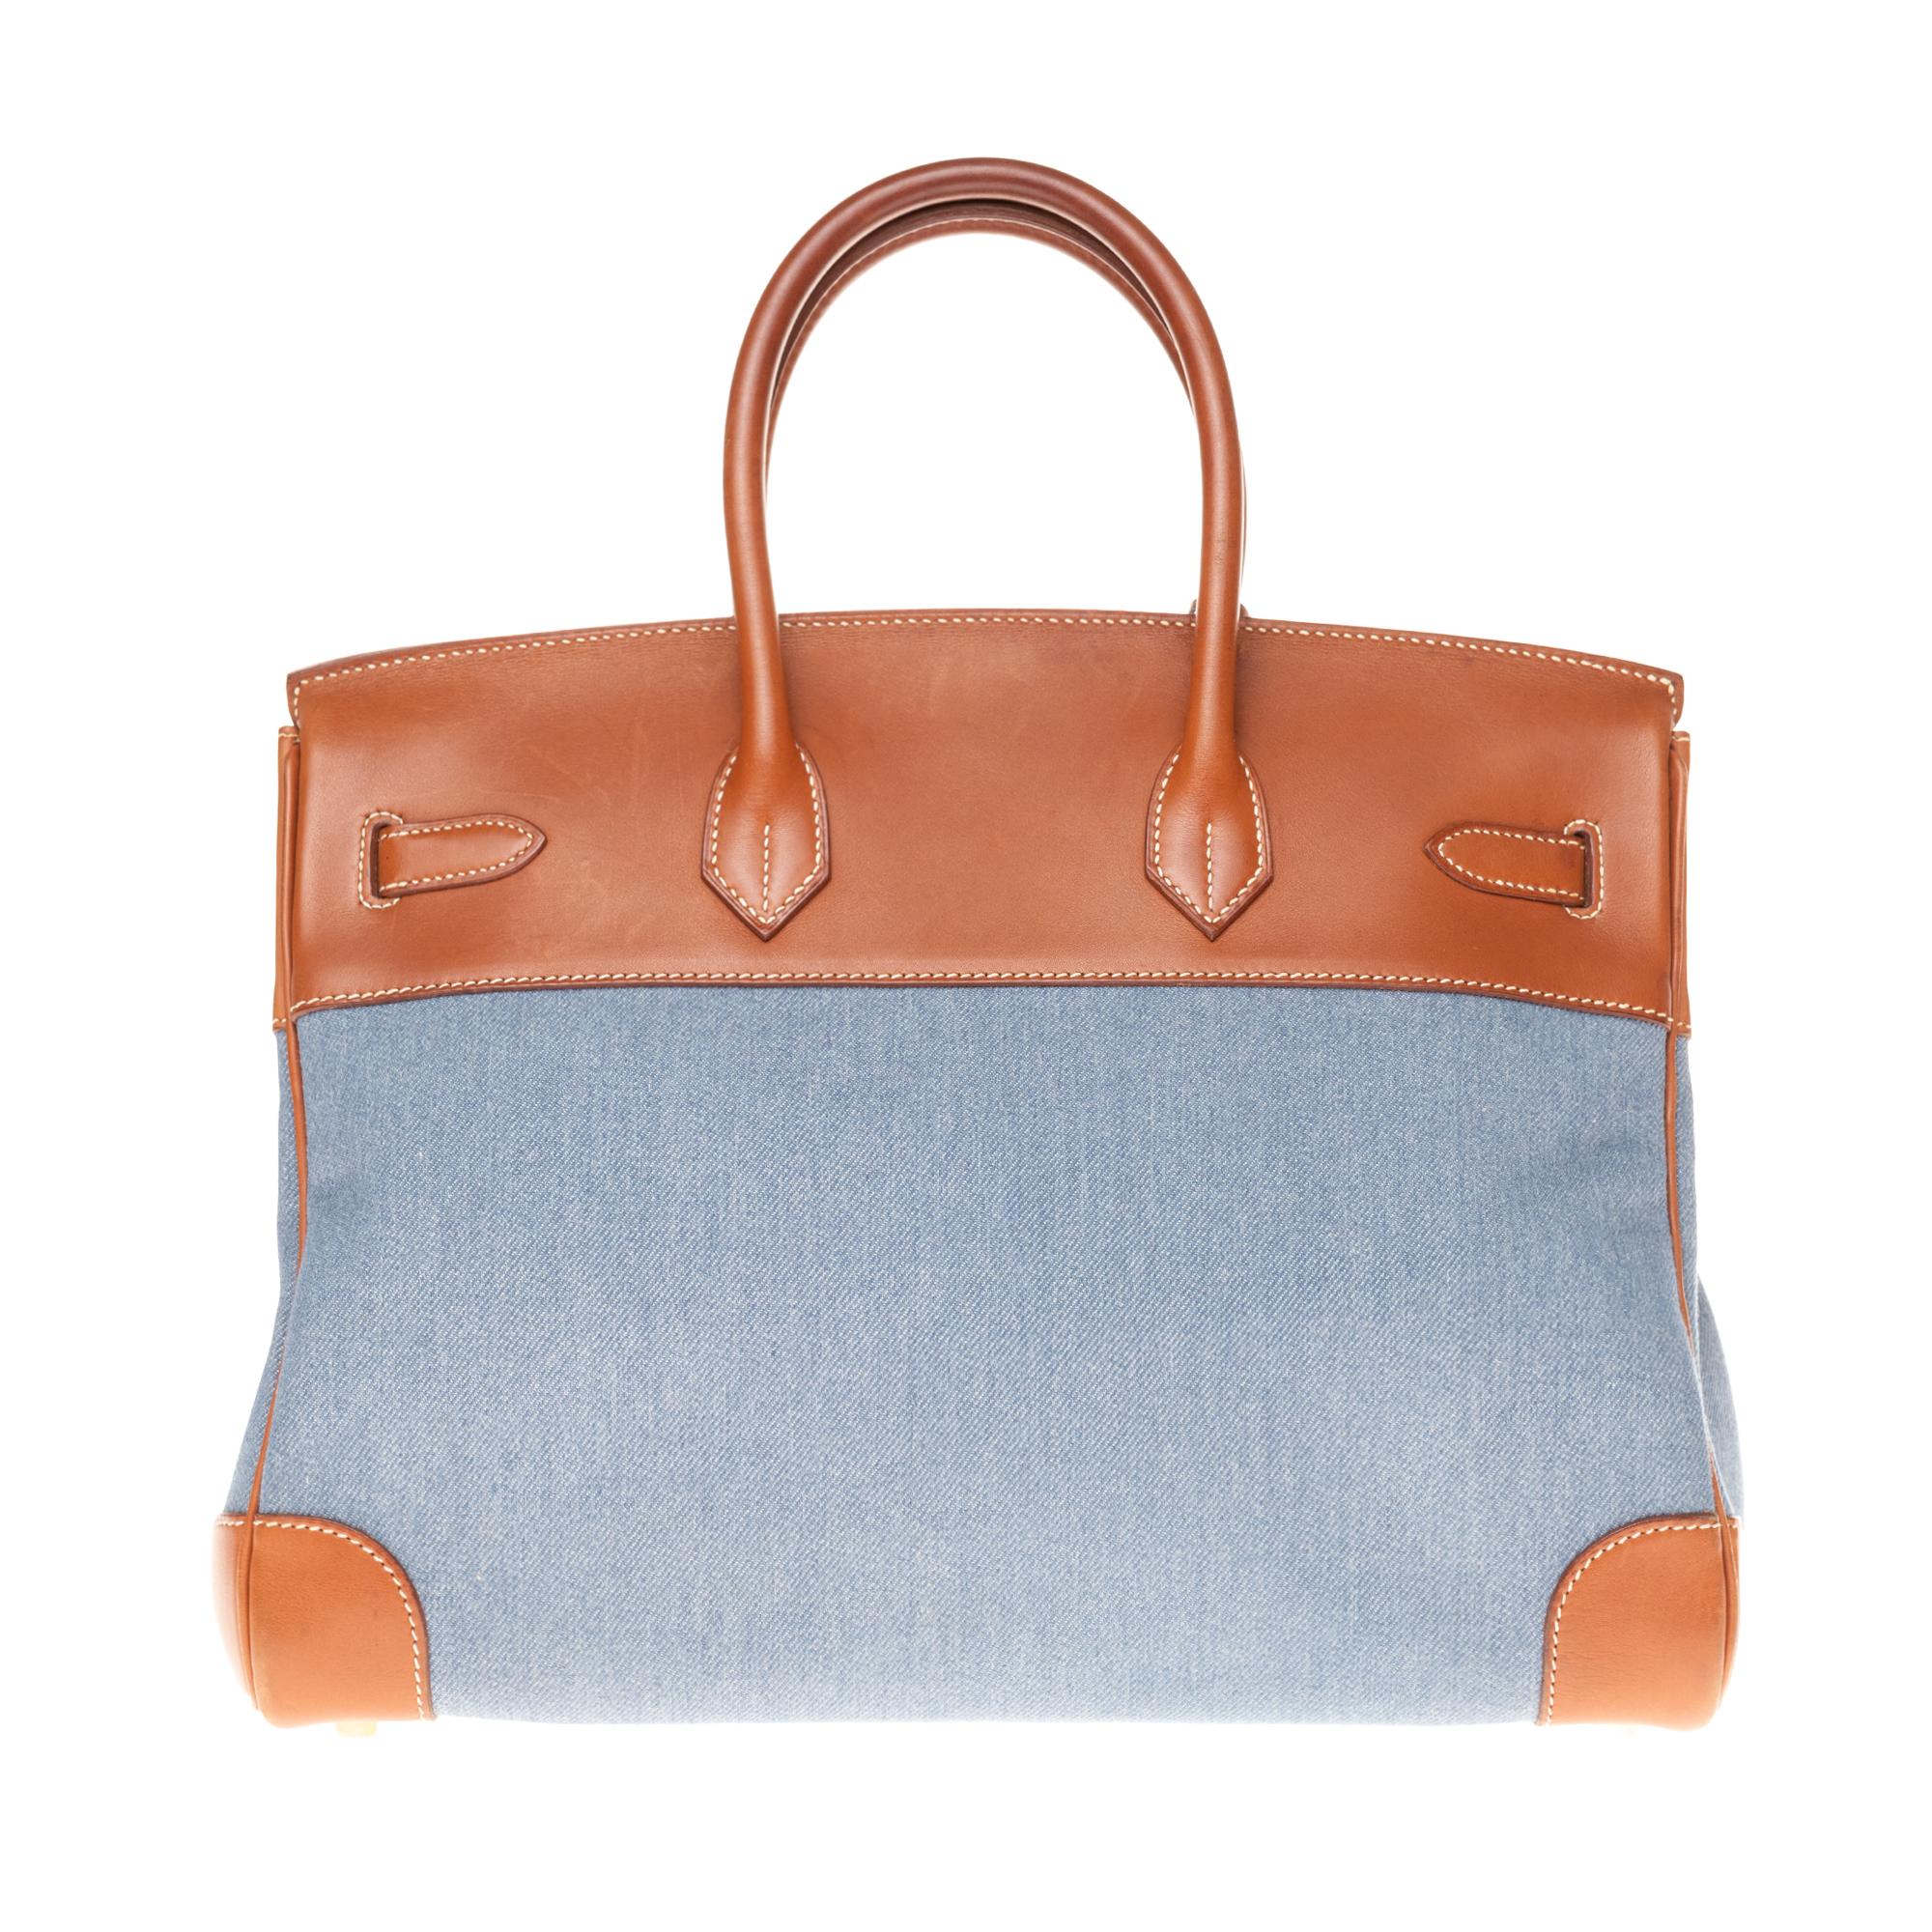 Stunning and rare Hermès Hermes 35cm Birkin in double-material brown barenia leather and blue denim , gold-plated silver metal trim, double handle in brown barenia leather allowing a handheld. 
Flap closure. 
Brown leather inner lining, one zipped